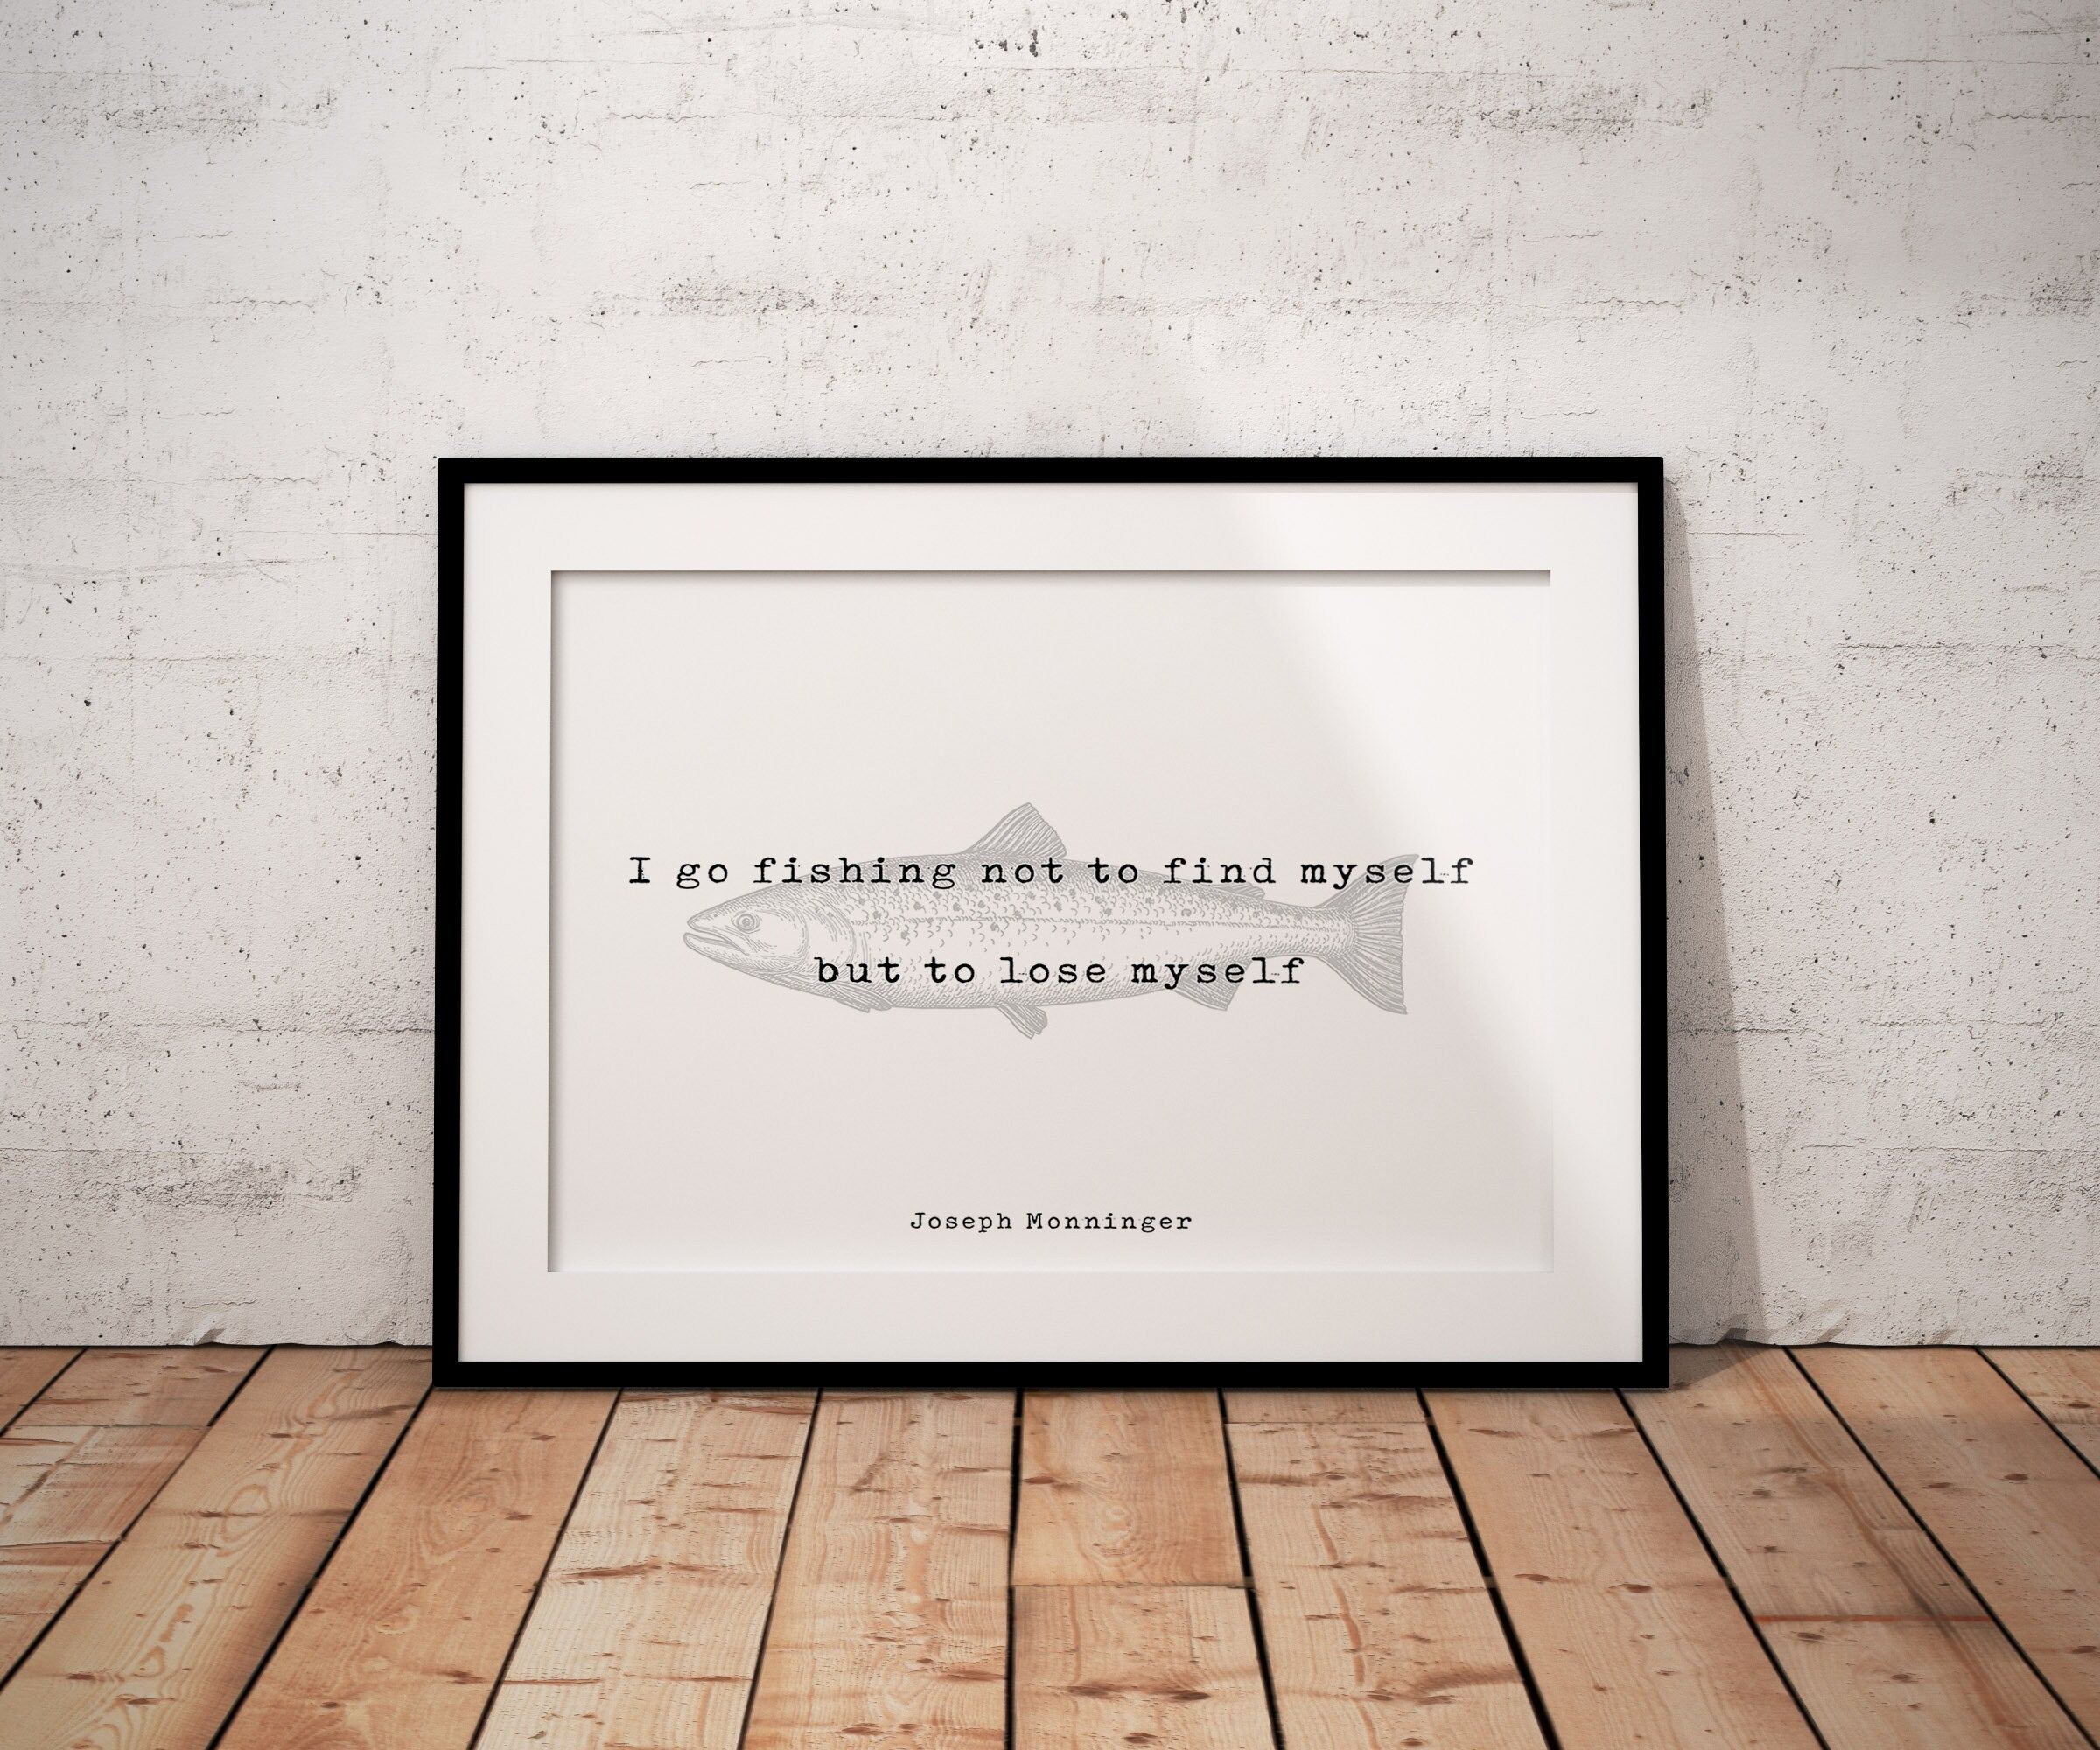 Inspirational Fishing Quote Print - Joseph Monninger I Go Fishing Not To Find Myself, Office Decor Life Quote Unframed